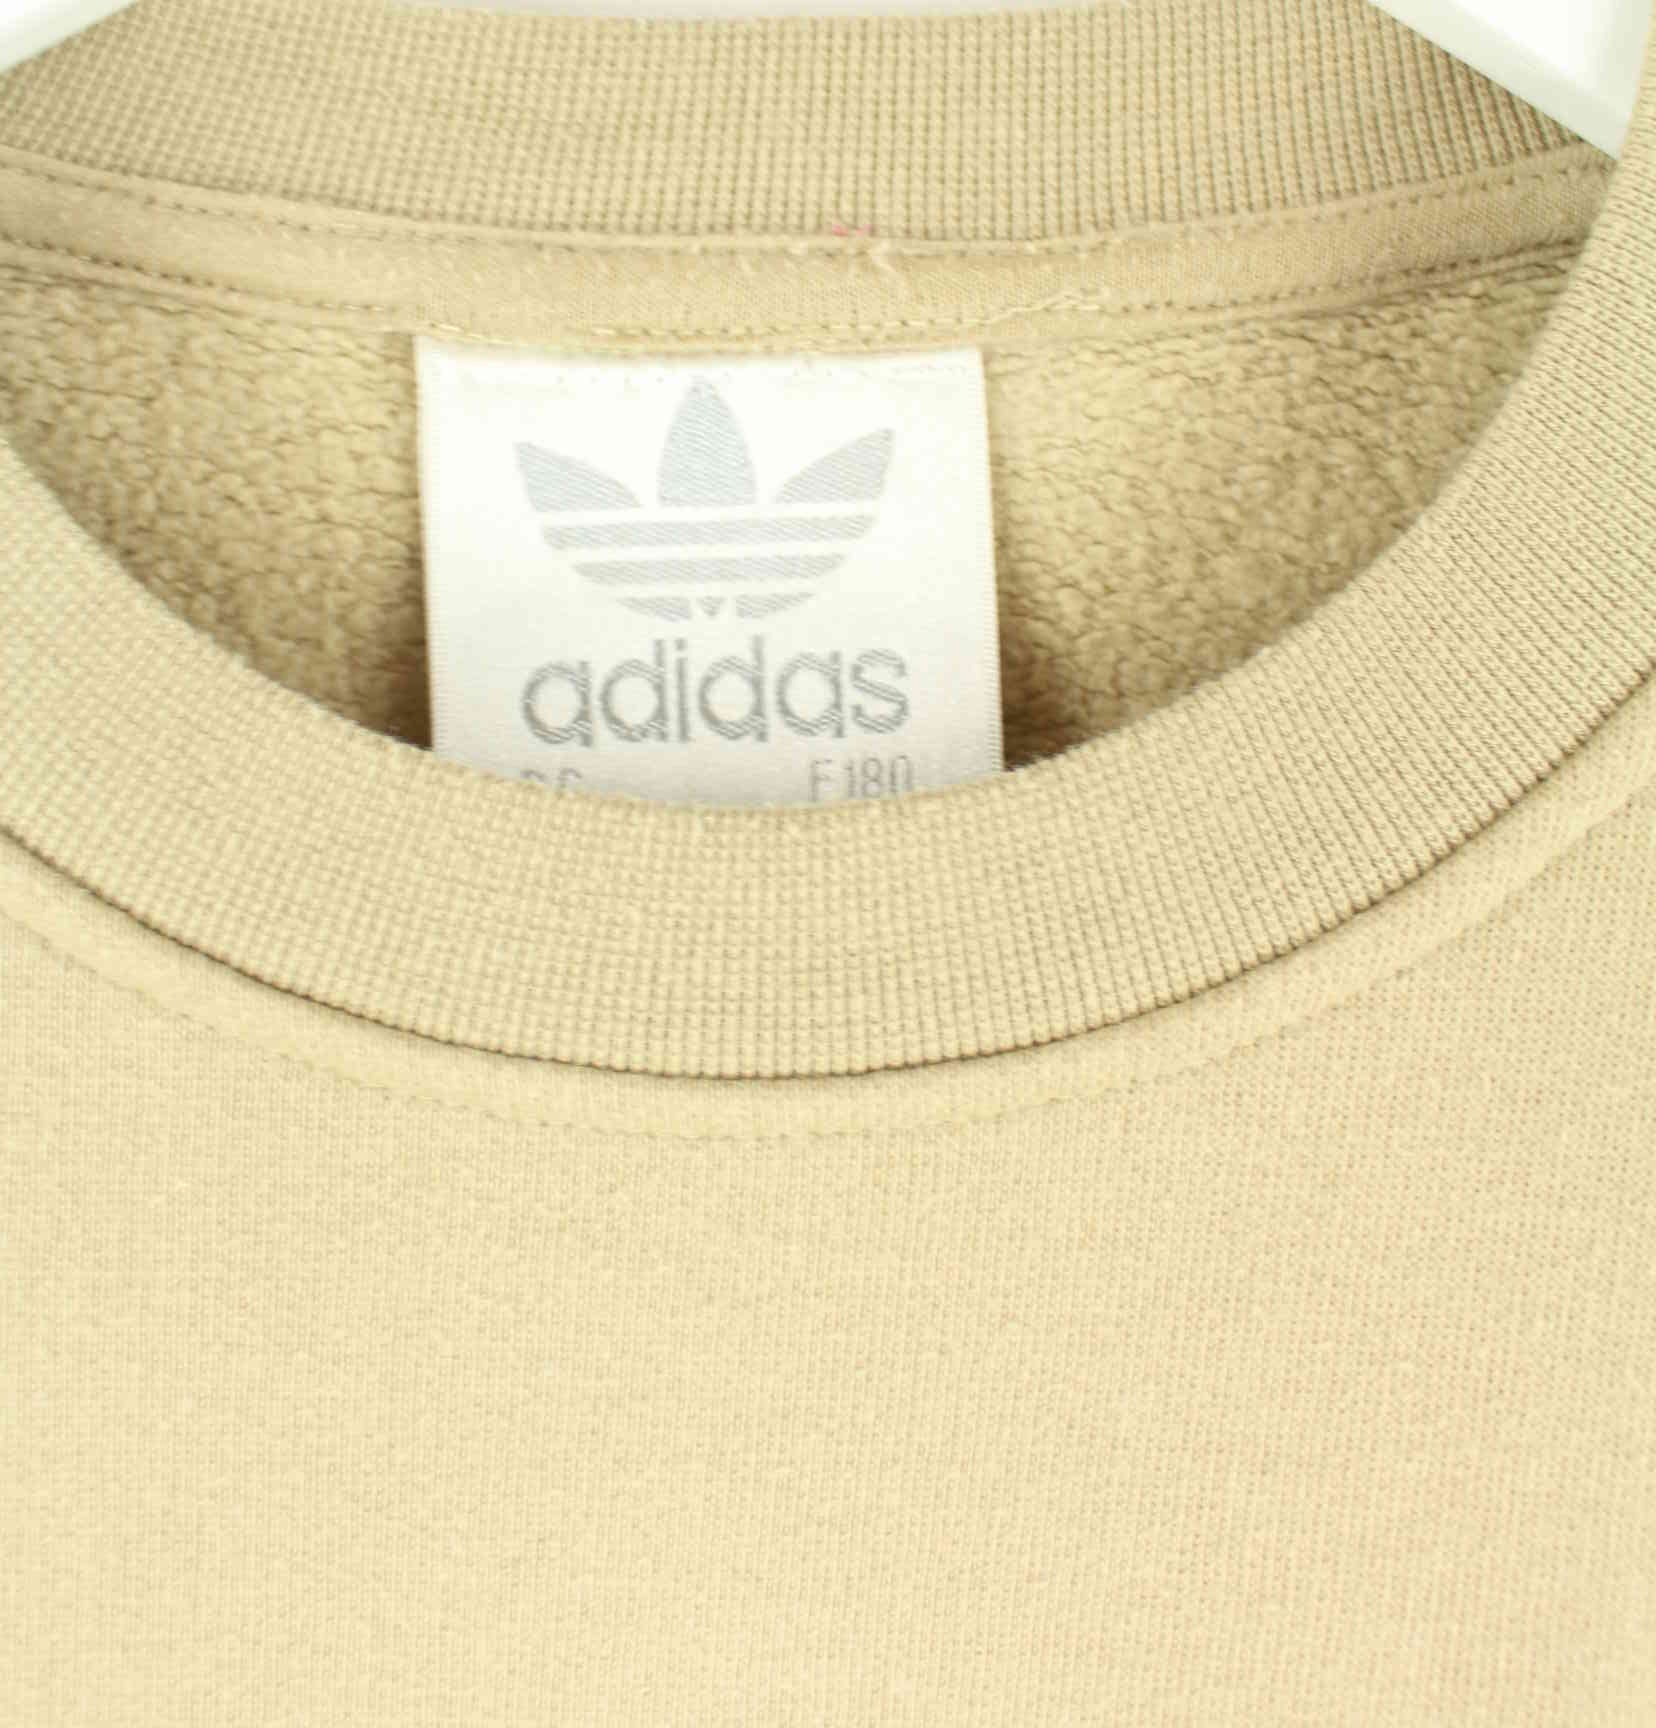 Adidas 80s Vintage Embroidered Sweater Beige L (detail image 2)